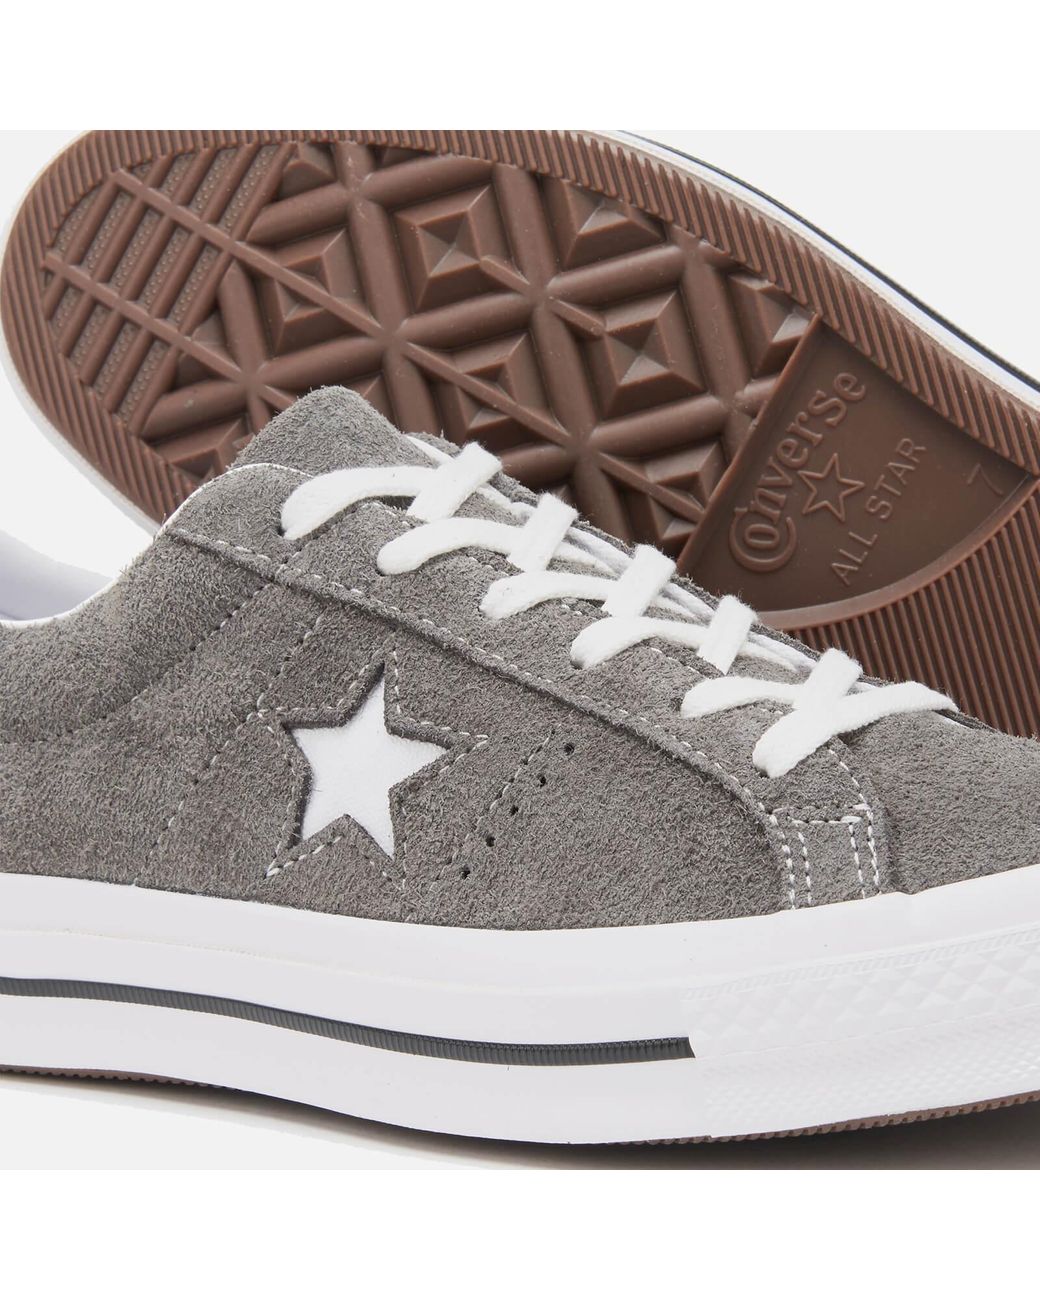 Vælg angst Moderne モデルで CONVERSE CONVERSE ONE STAR OX VINTAGE SUEDE海外限定 の通販 by とらふぁーむ's  shop｜コンバースならラクマ - ーヴィンテ